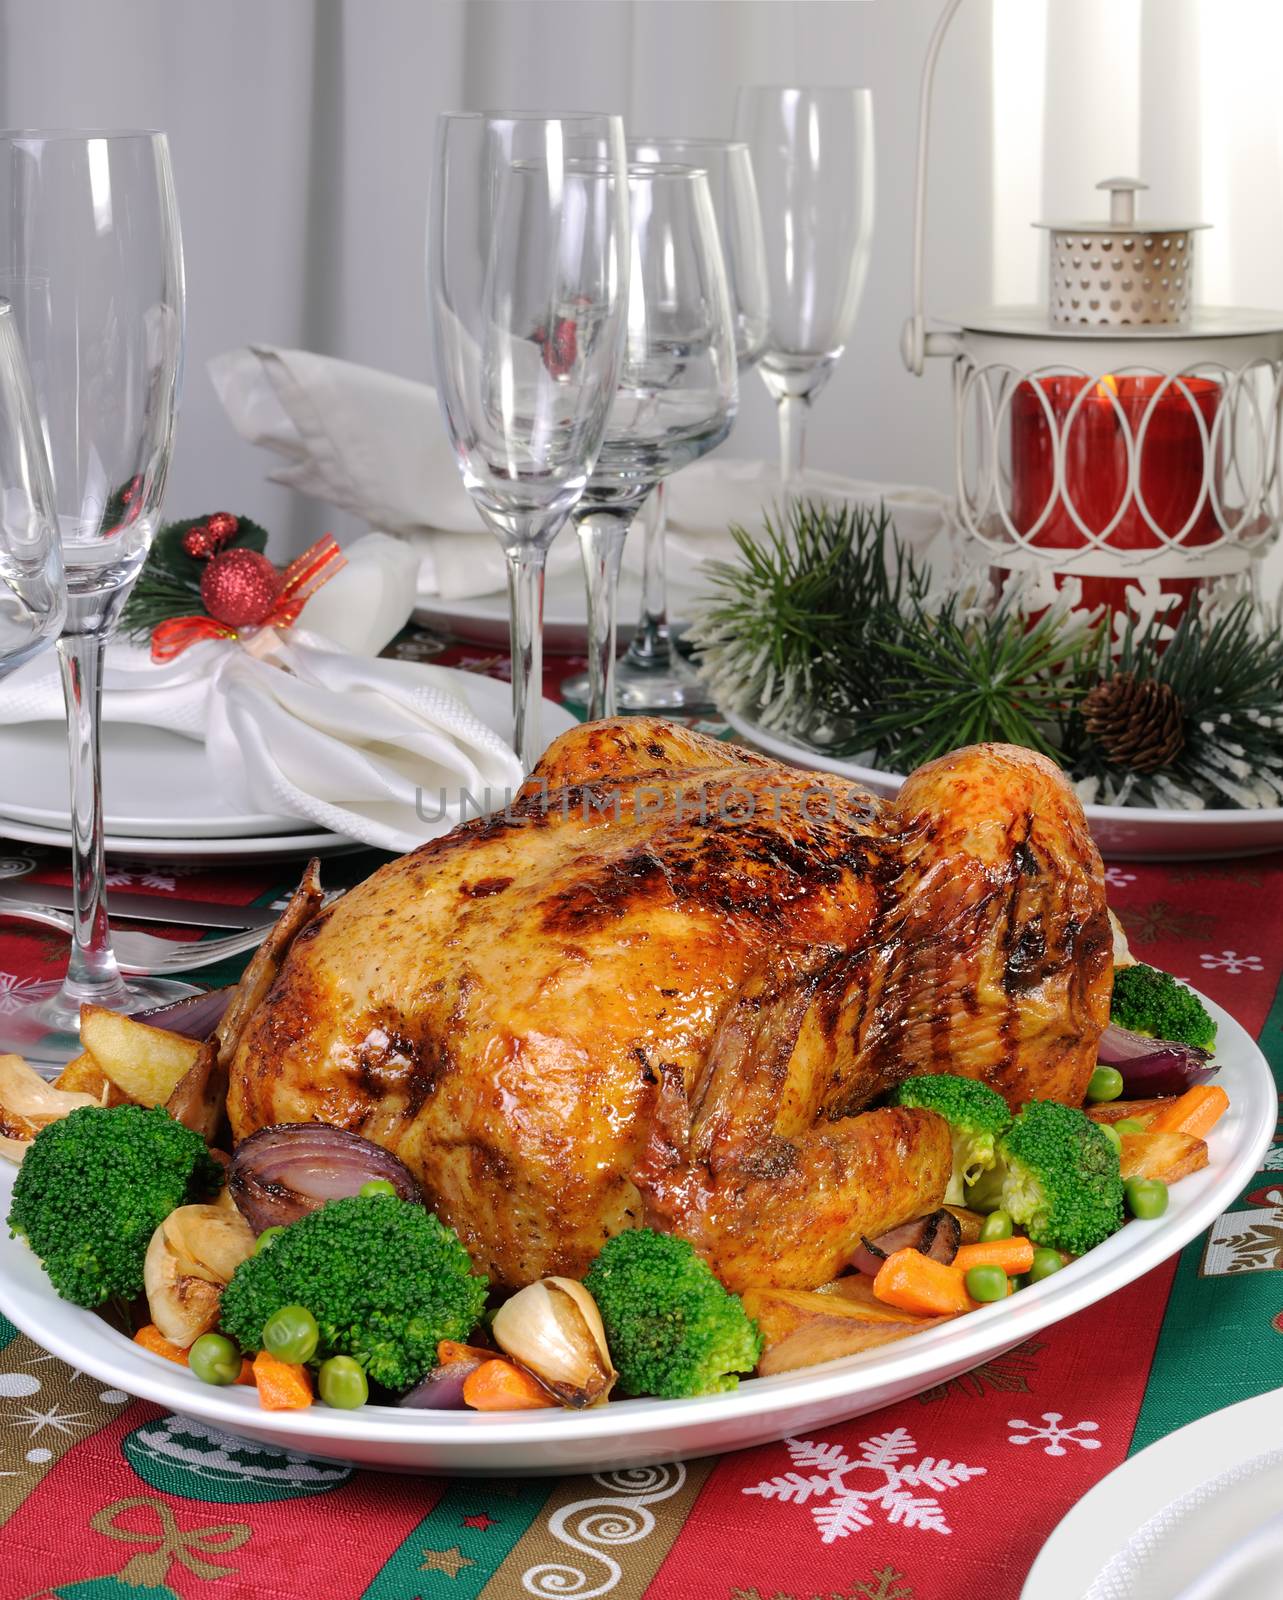 Baked chicken with vegetables on the festive table